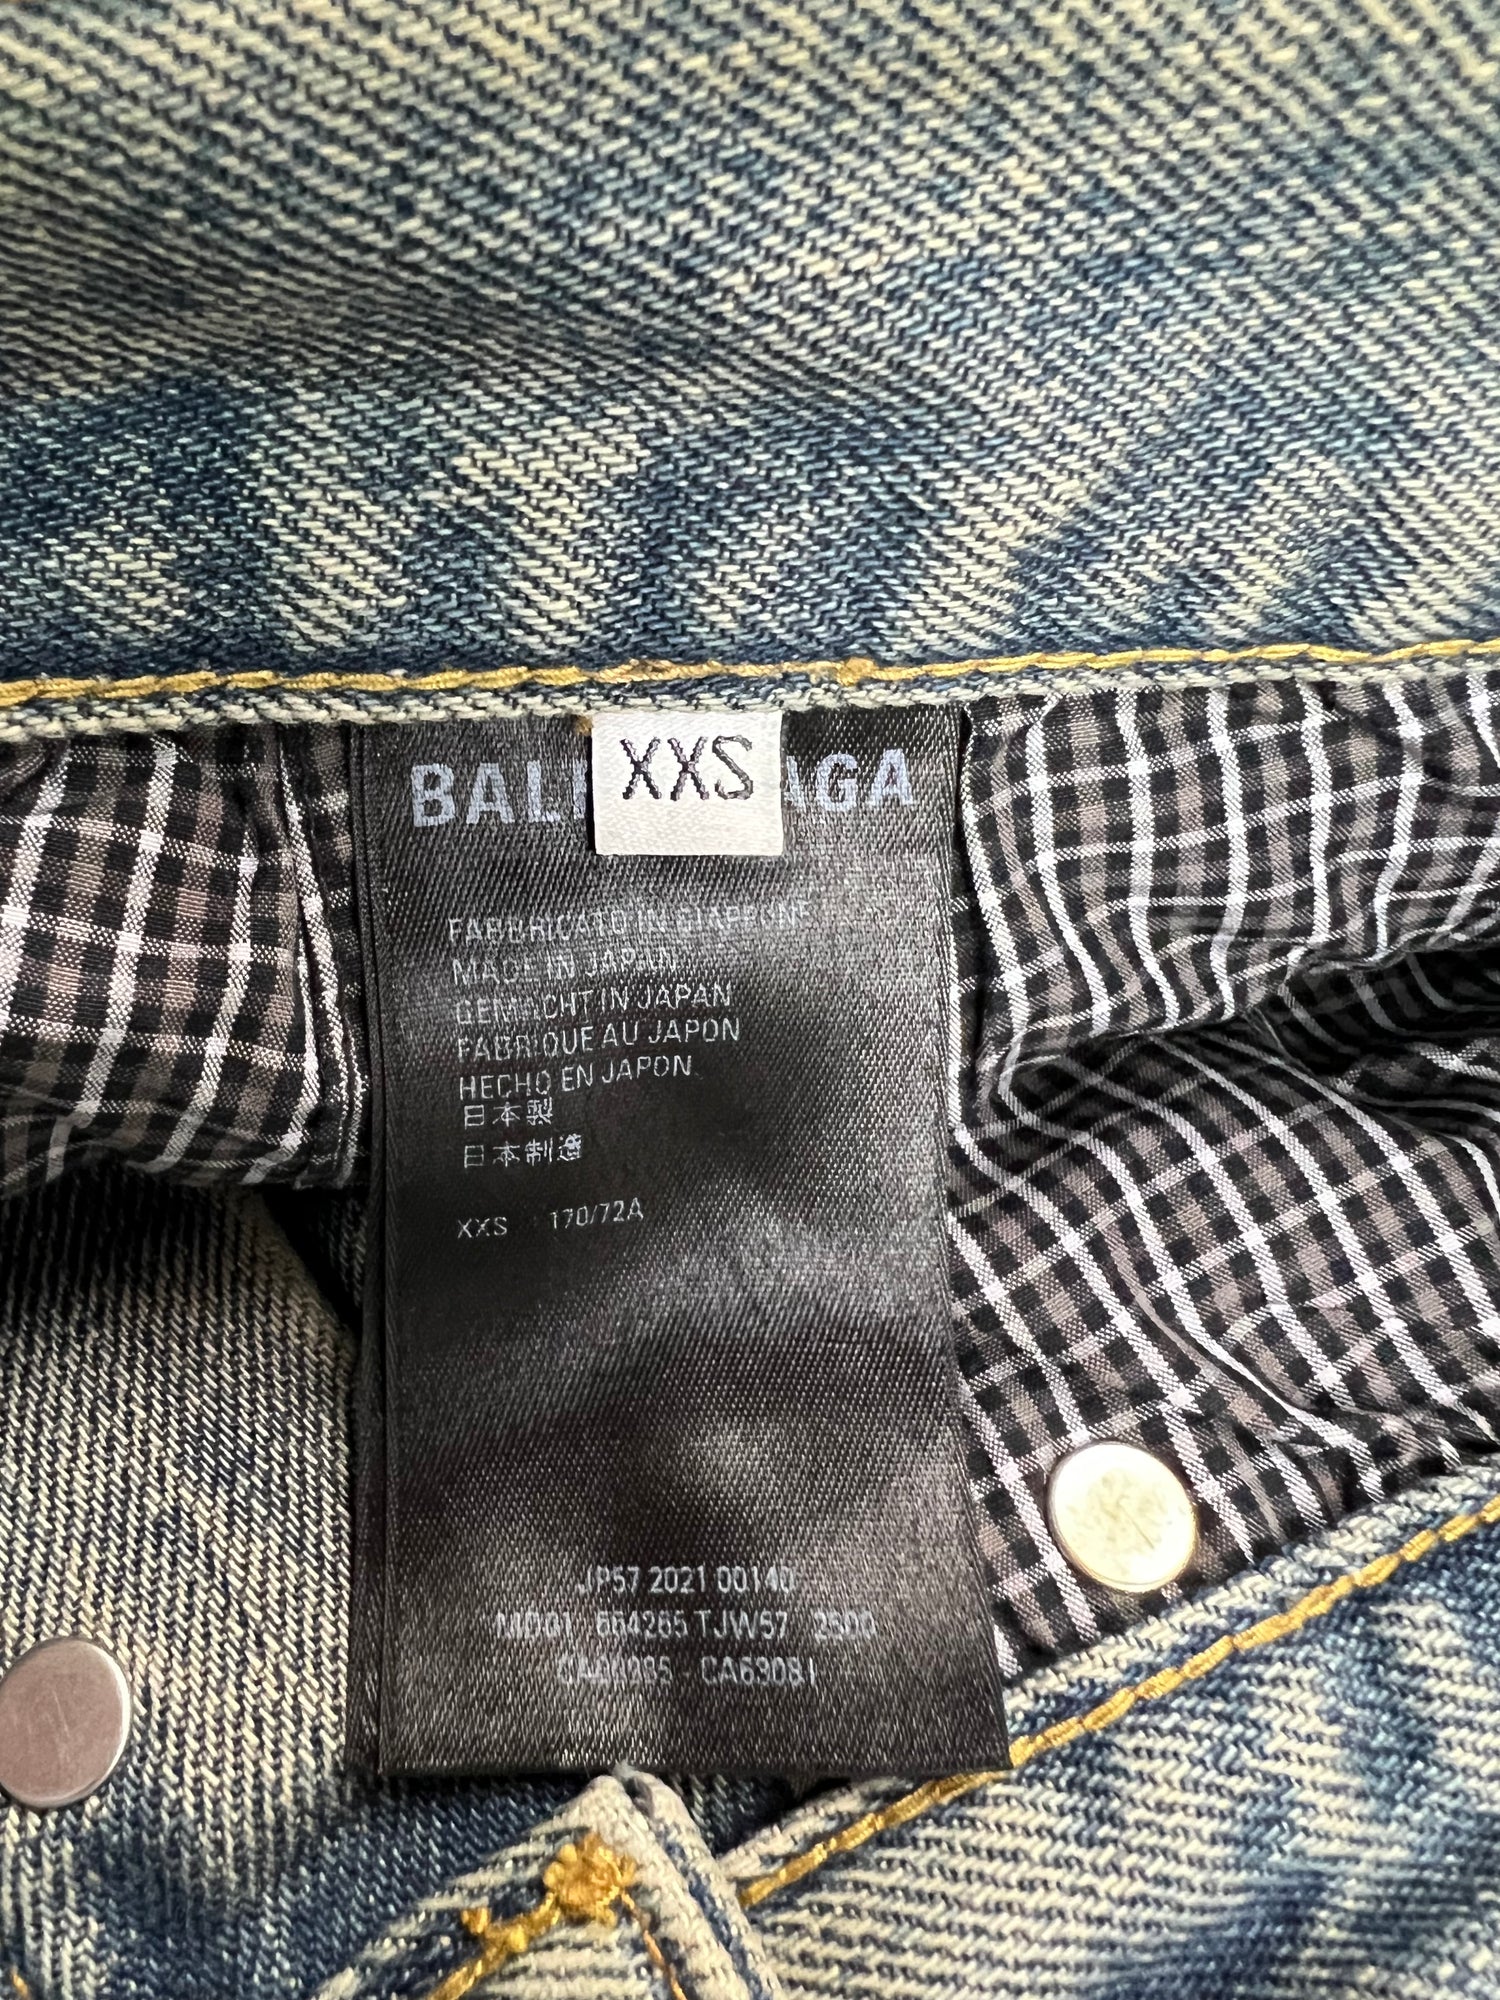 Balenciaga AW21 destroyed shredded torn boxers Jeans in blue SZ:XXS|S|M